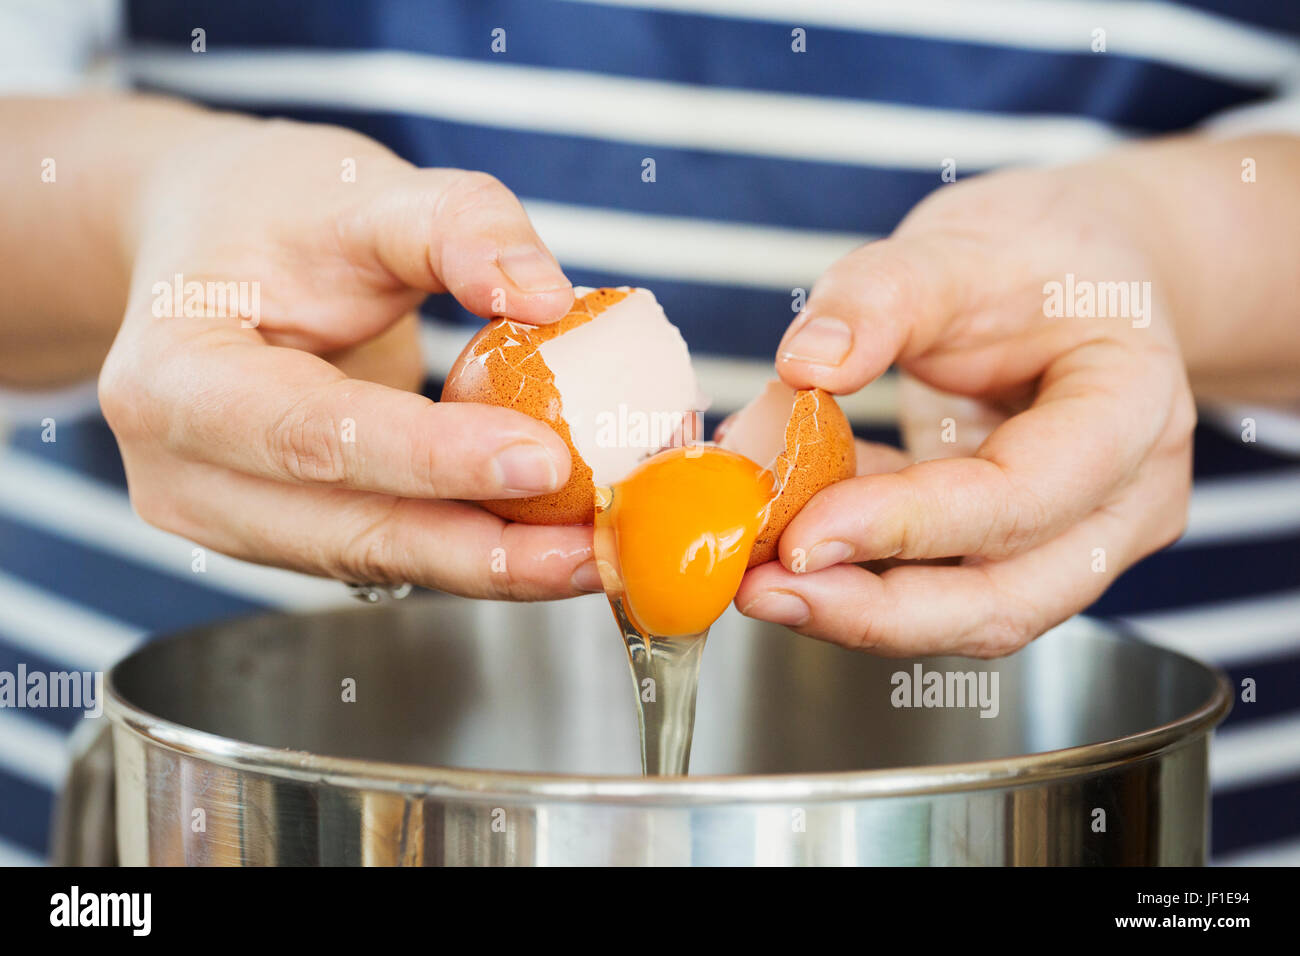 Close up of person wearing a blue and white stripy apron separating egg over a metal bowl. Stock Photo